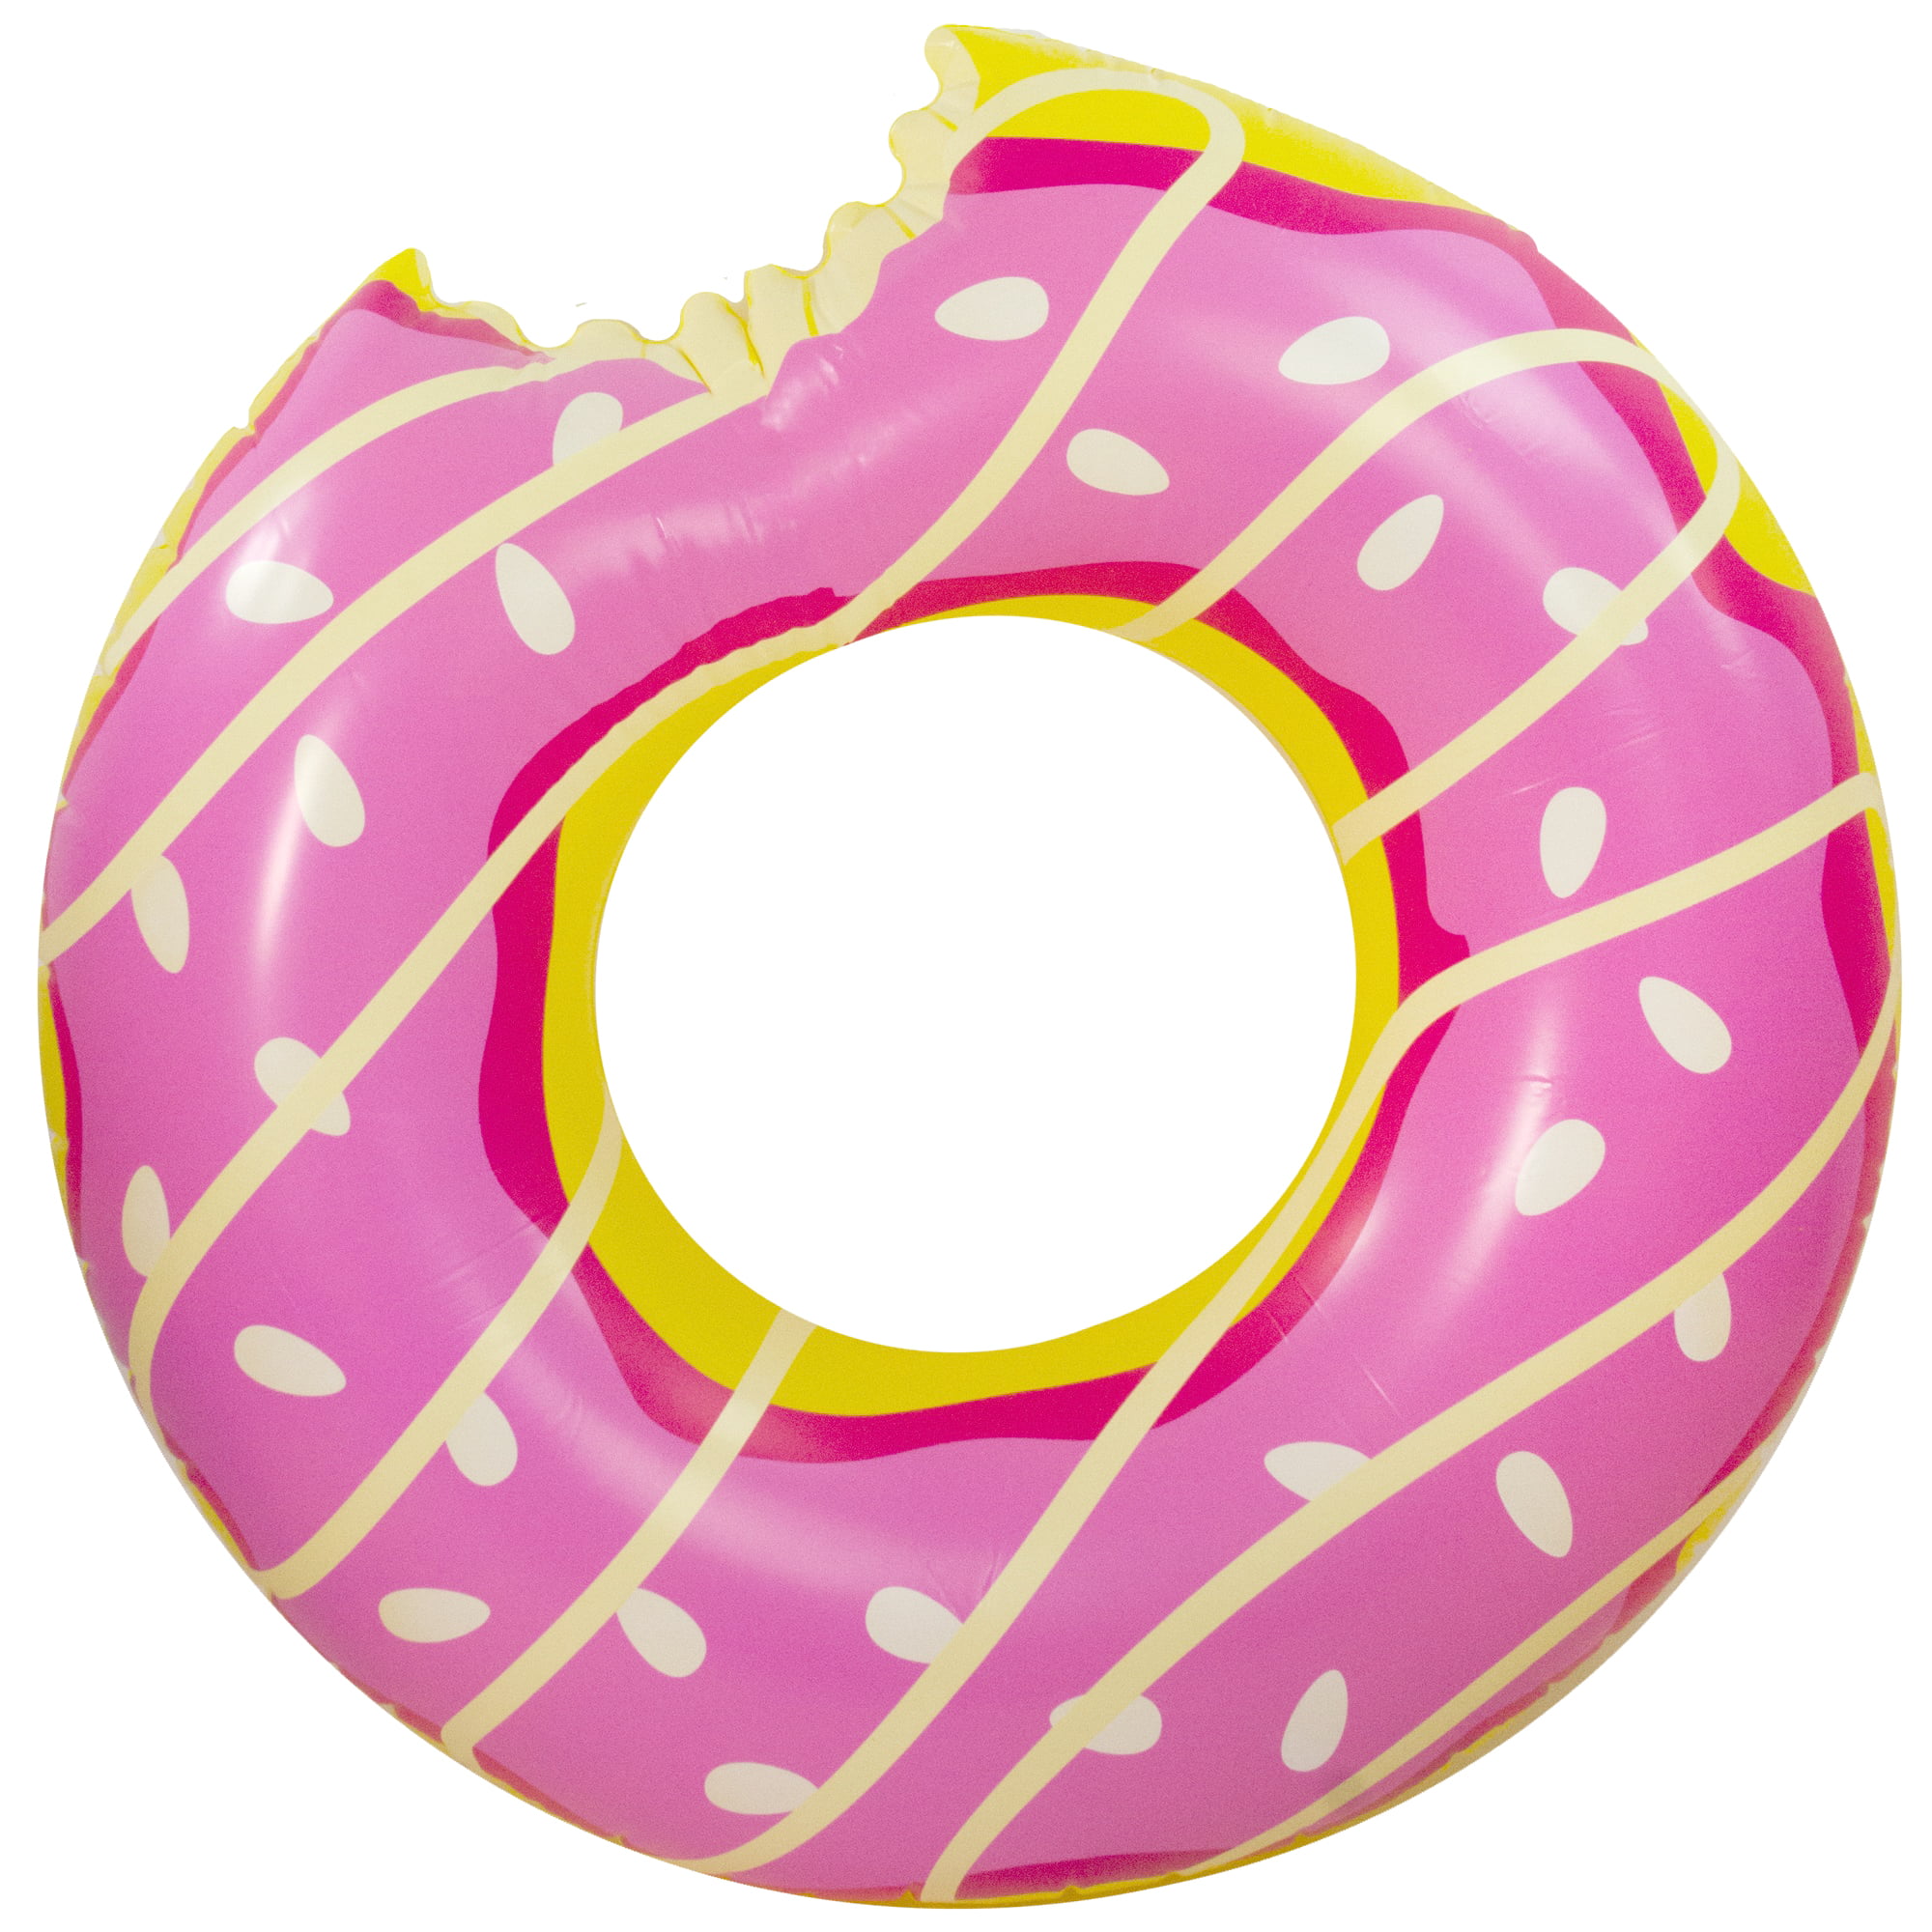 120cm Giant Inflatable Donut Pool Float Raft Swimming Tube Ring for Adults and Kids Strawberry AMH 4ft Patch kit Include